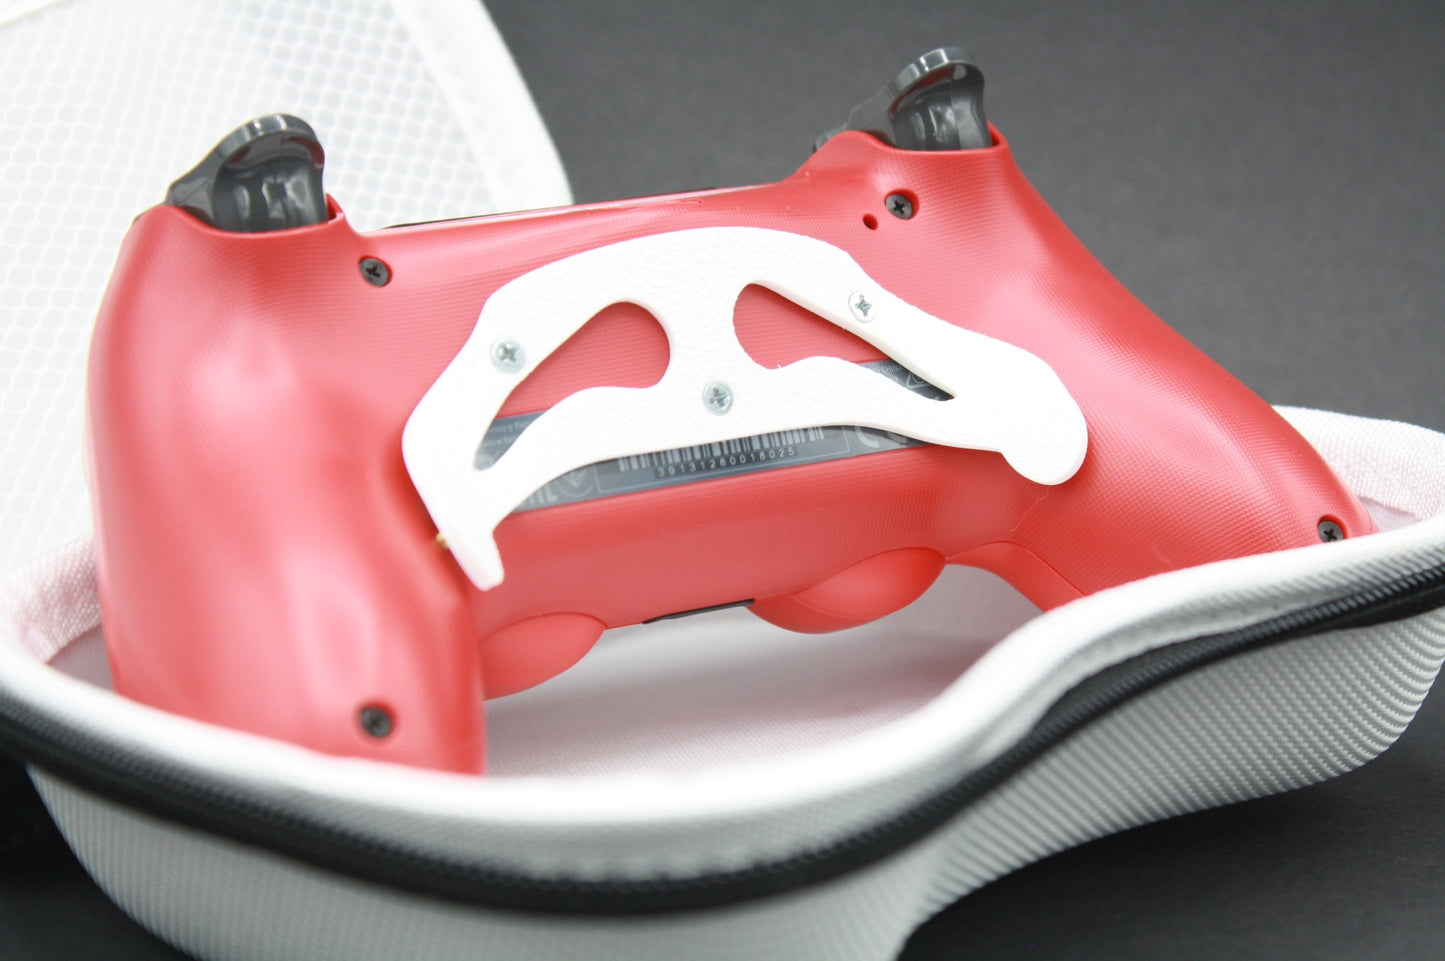 PS4 Controller "Magma Red" mit Zweier-Paddles